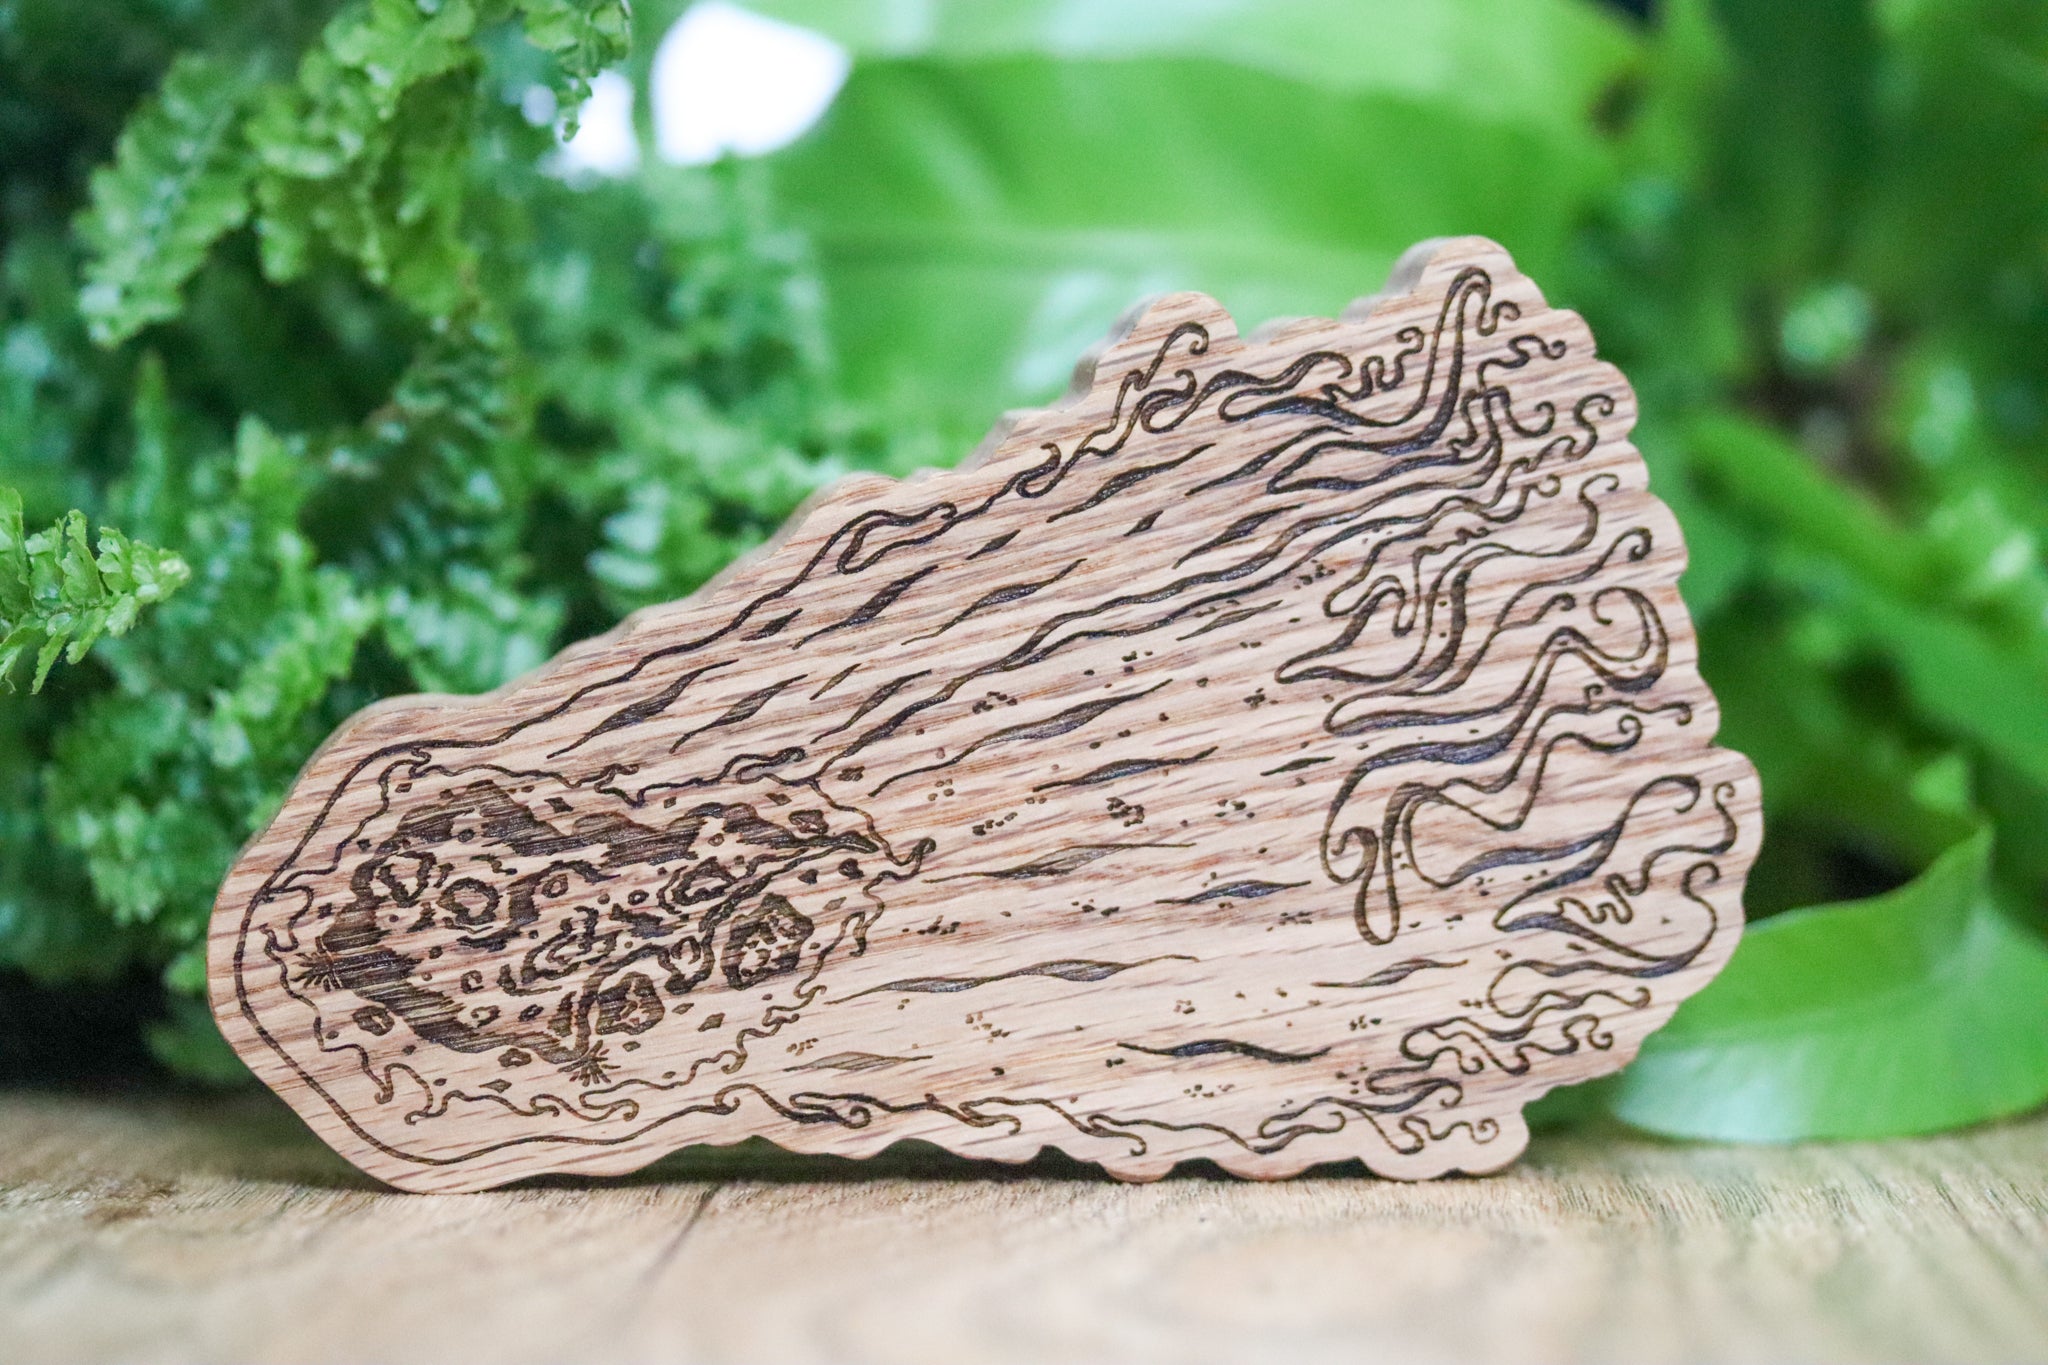 Wooden oak educational comet toy lasered artists impression. Ferns in the background behind out of focus